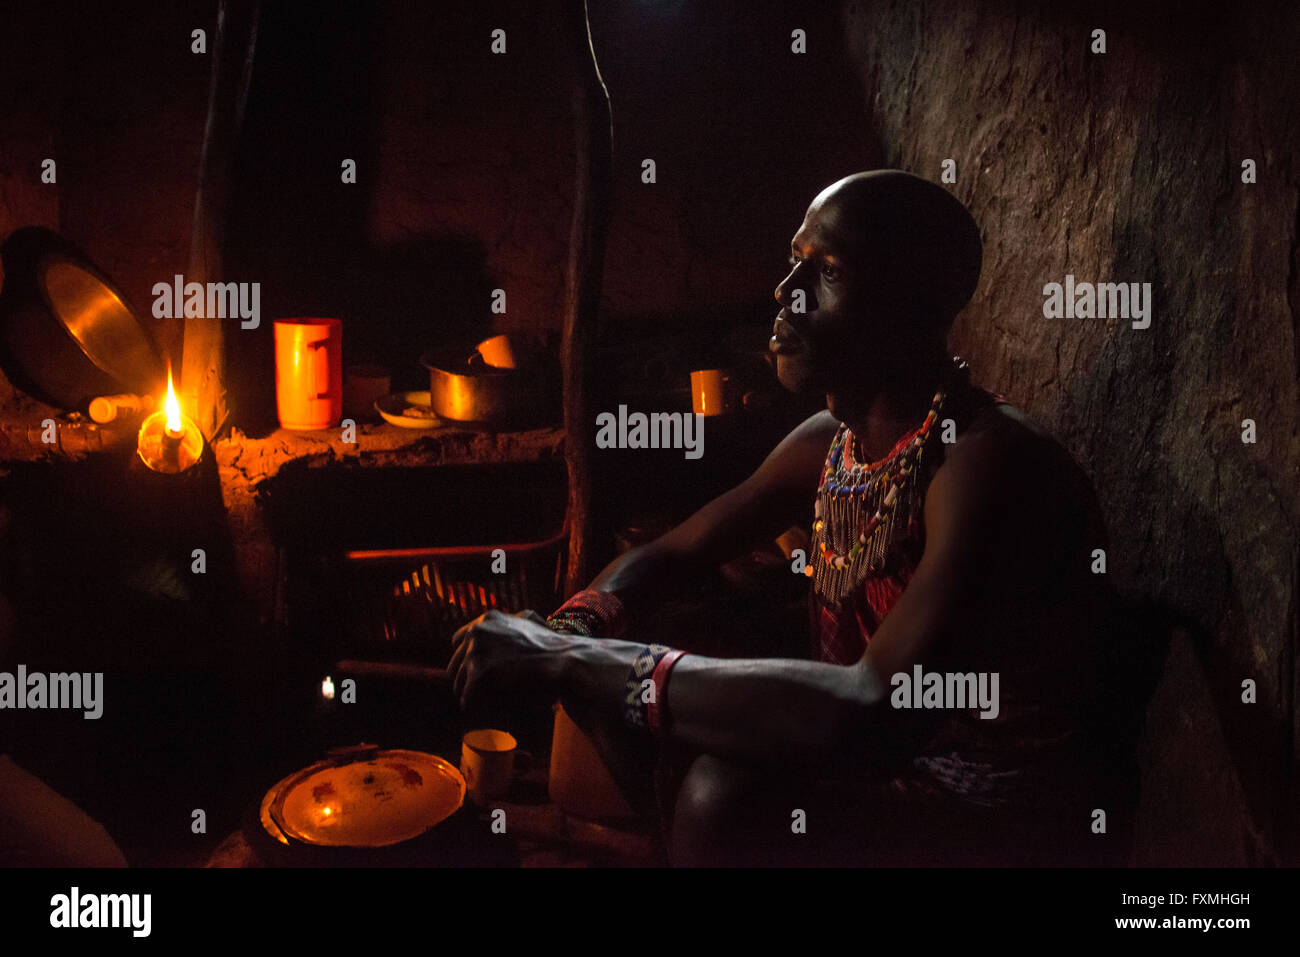 A Masai chief in his home July 10, 2014 in Kenya. Stock Photo